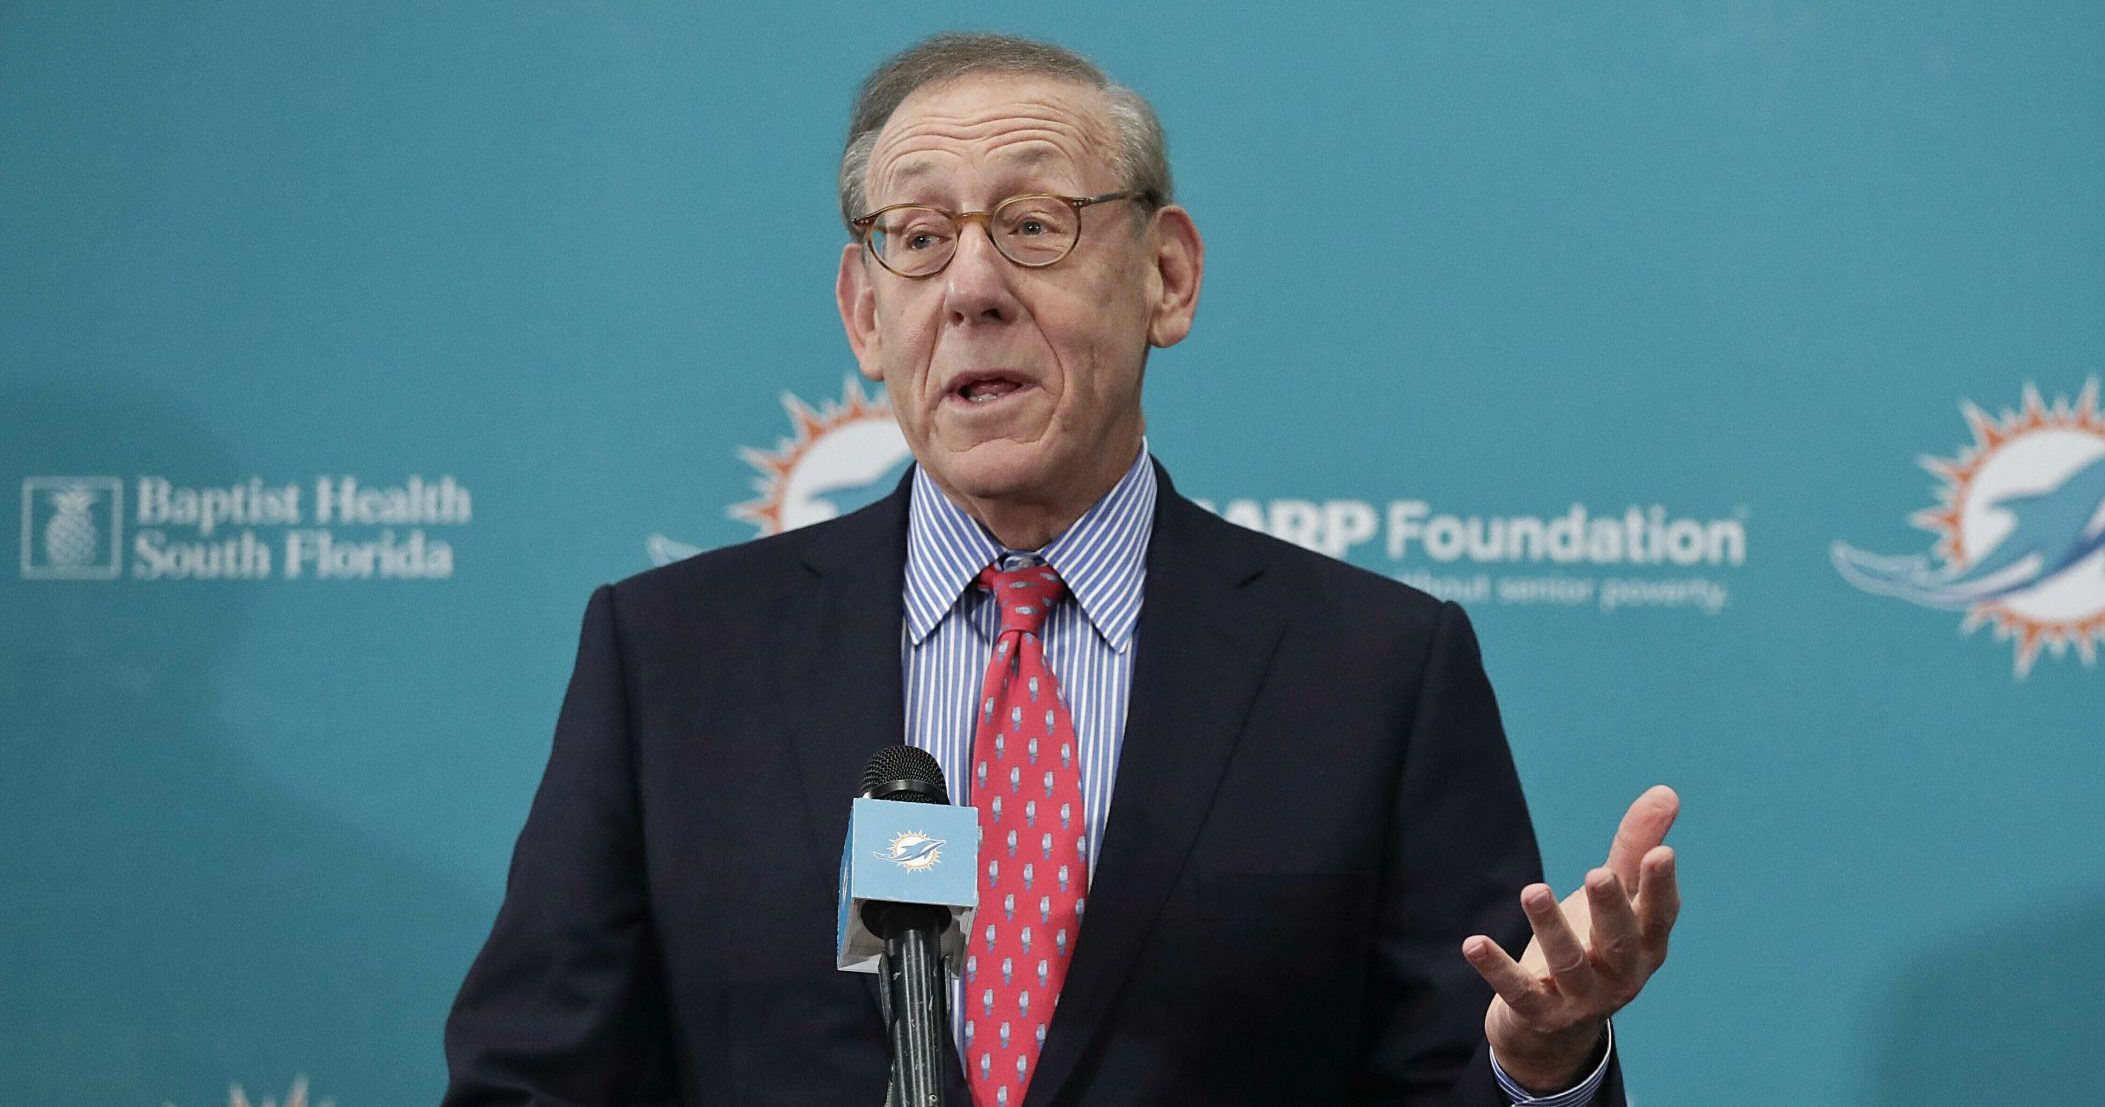 Miami Dolphins owner Stephen Ross speaks during a news conference Feb. 4, 2019, in Davie, Florida.